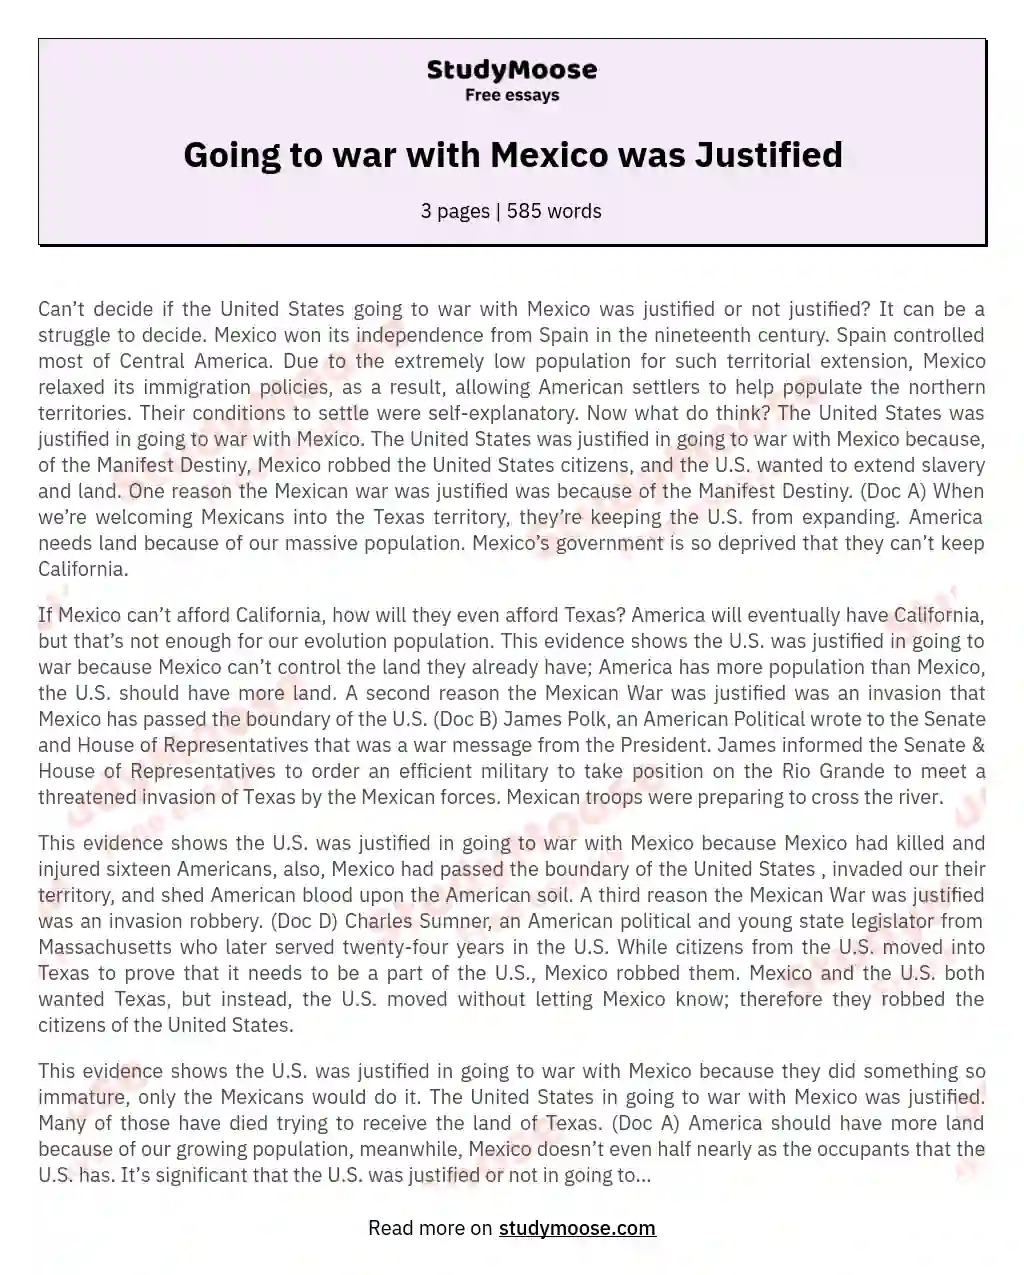 Going to war with Mexico was Justified essay